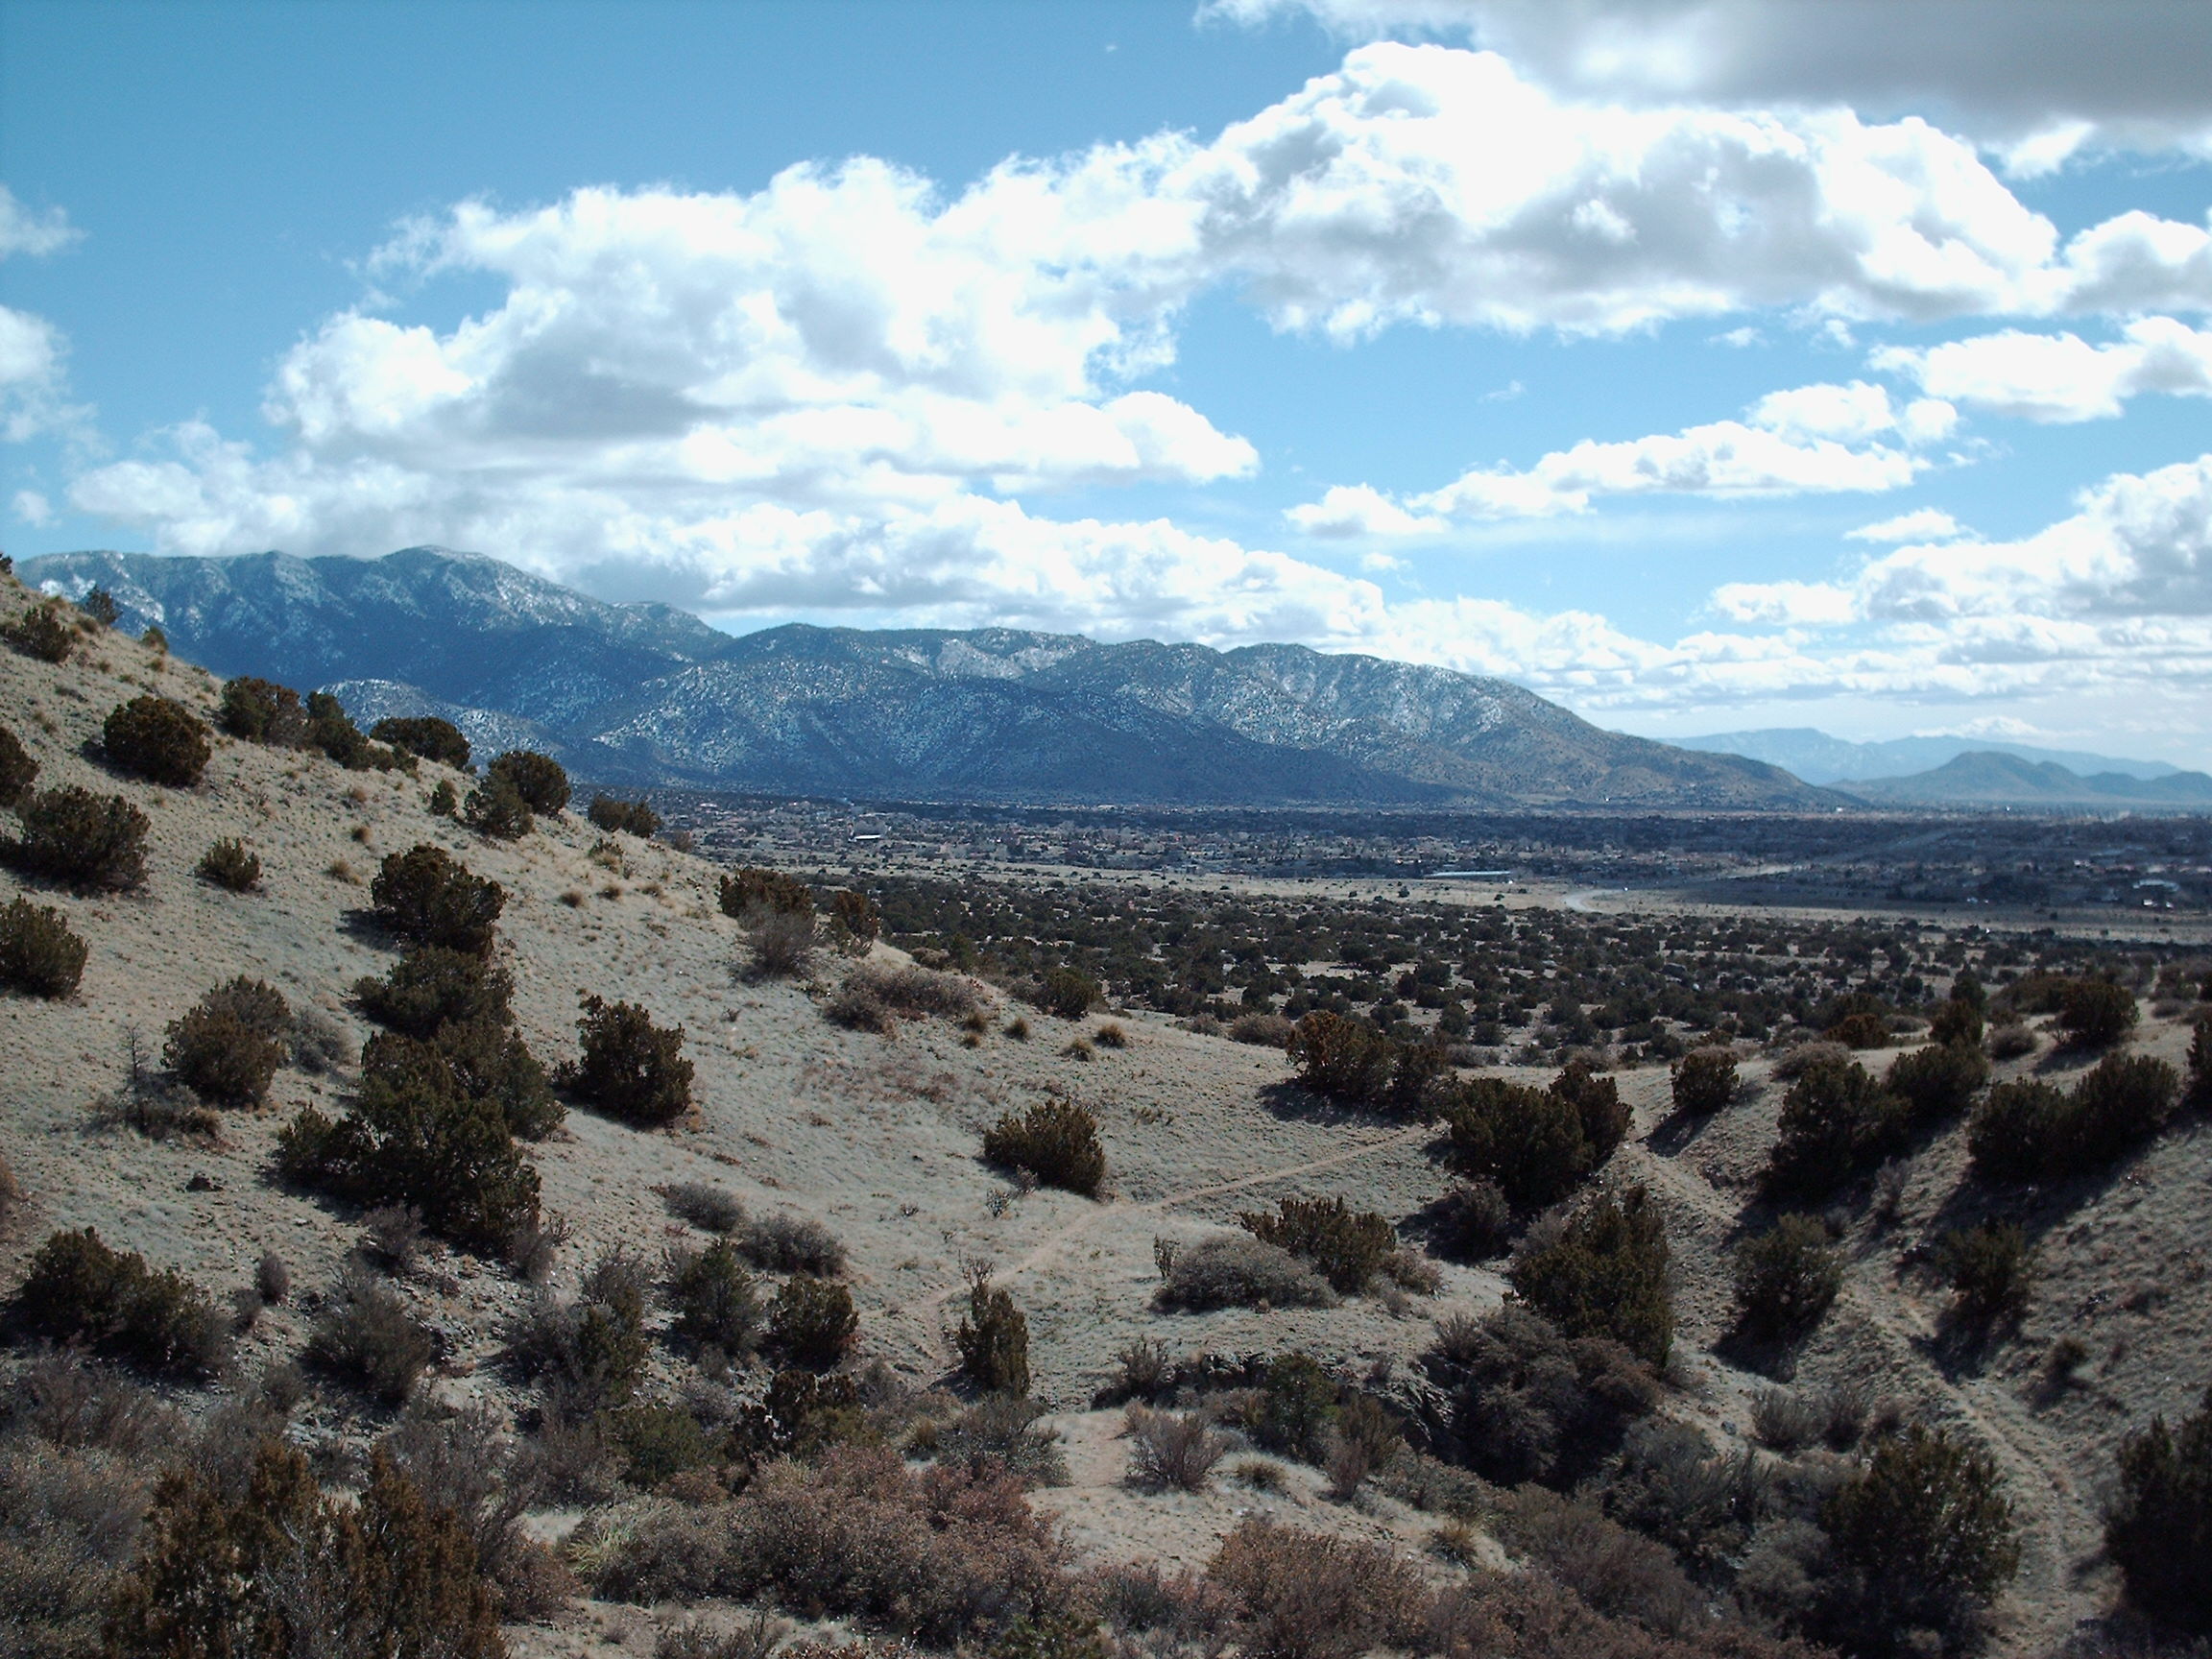 Foothills of Sandia Mts, New Mexico